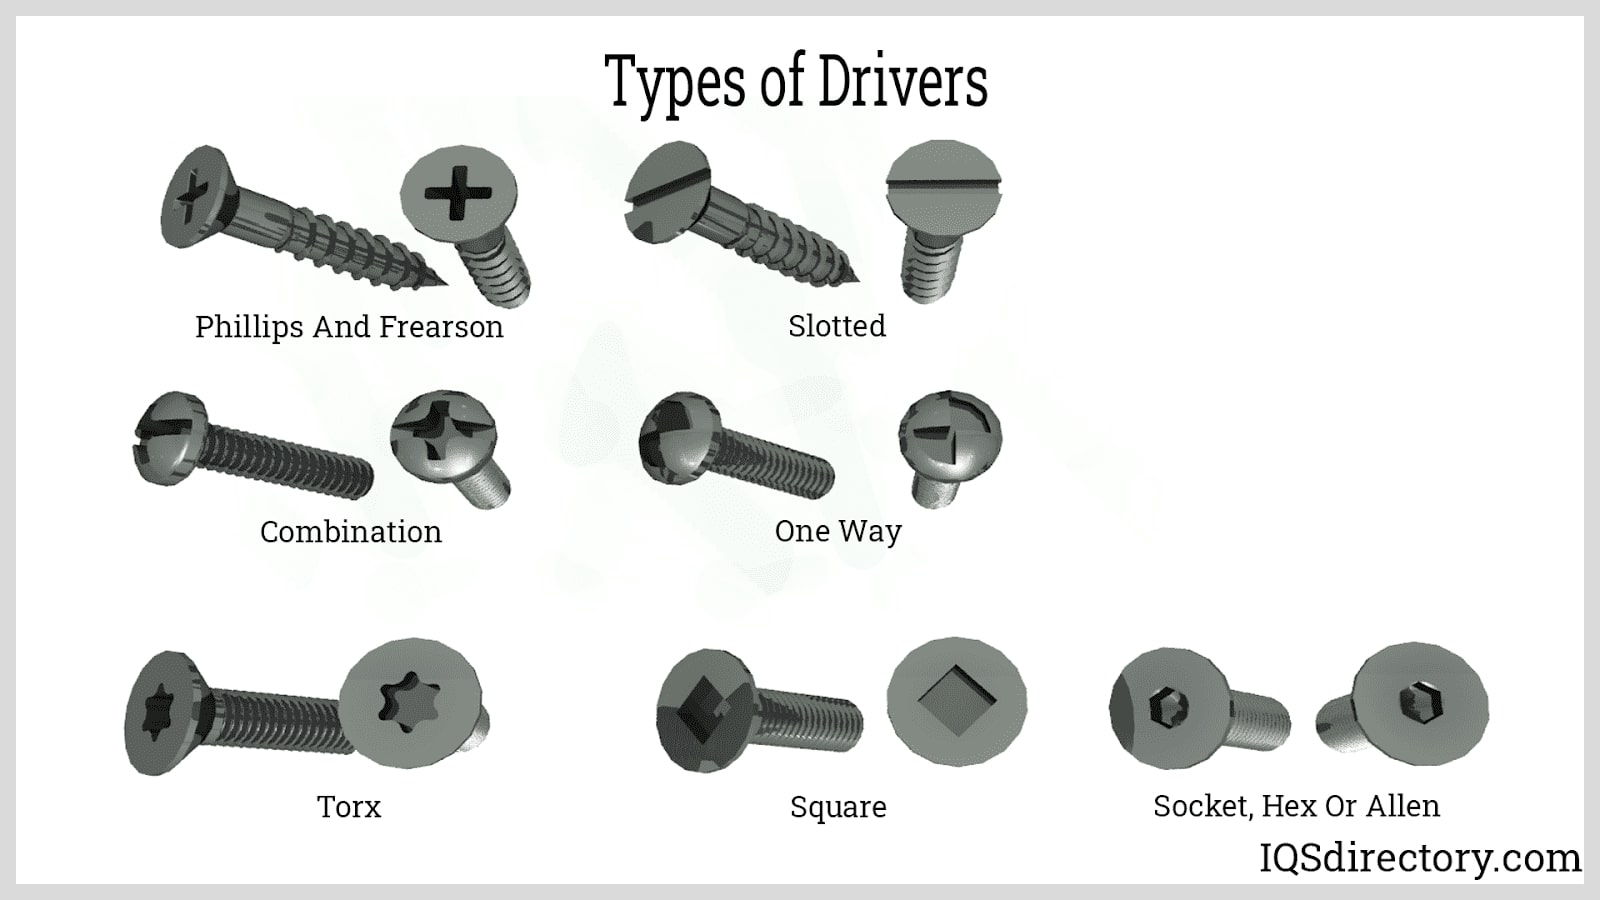 Fastener: What Is It? How Is It Used? Types Of, Materials